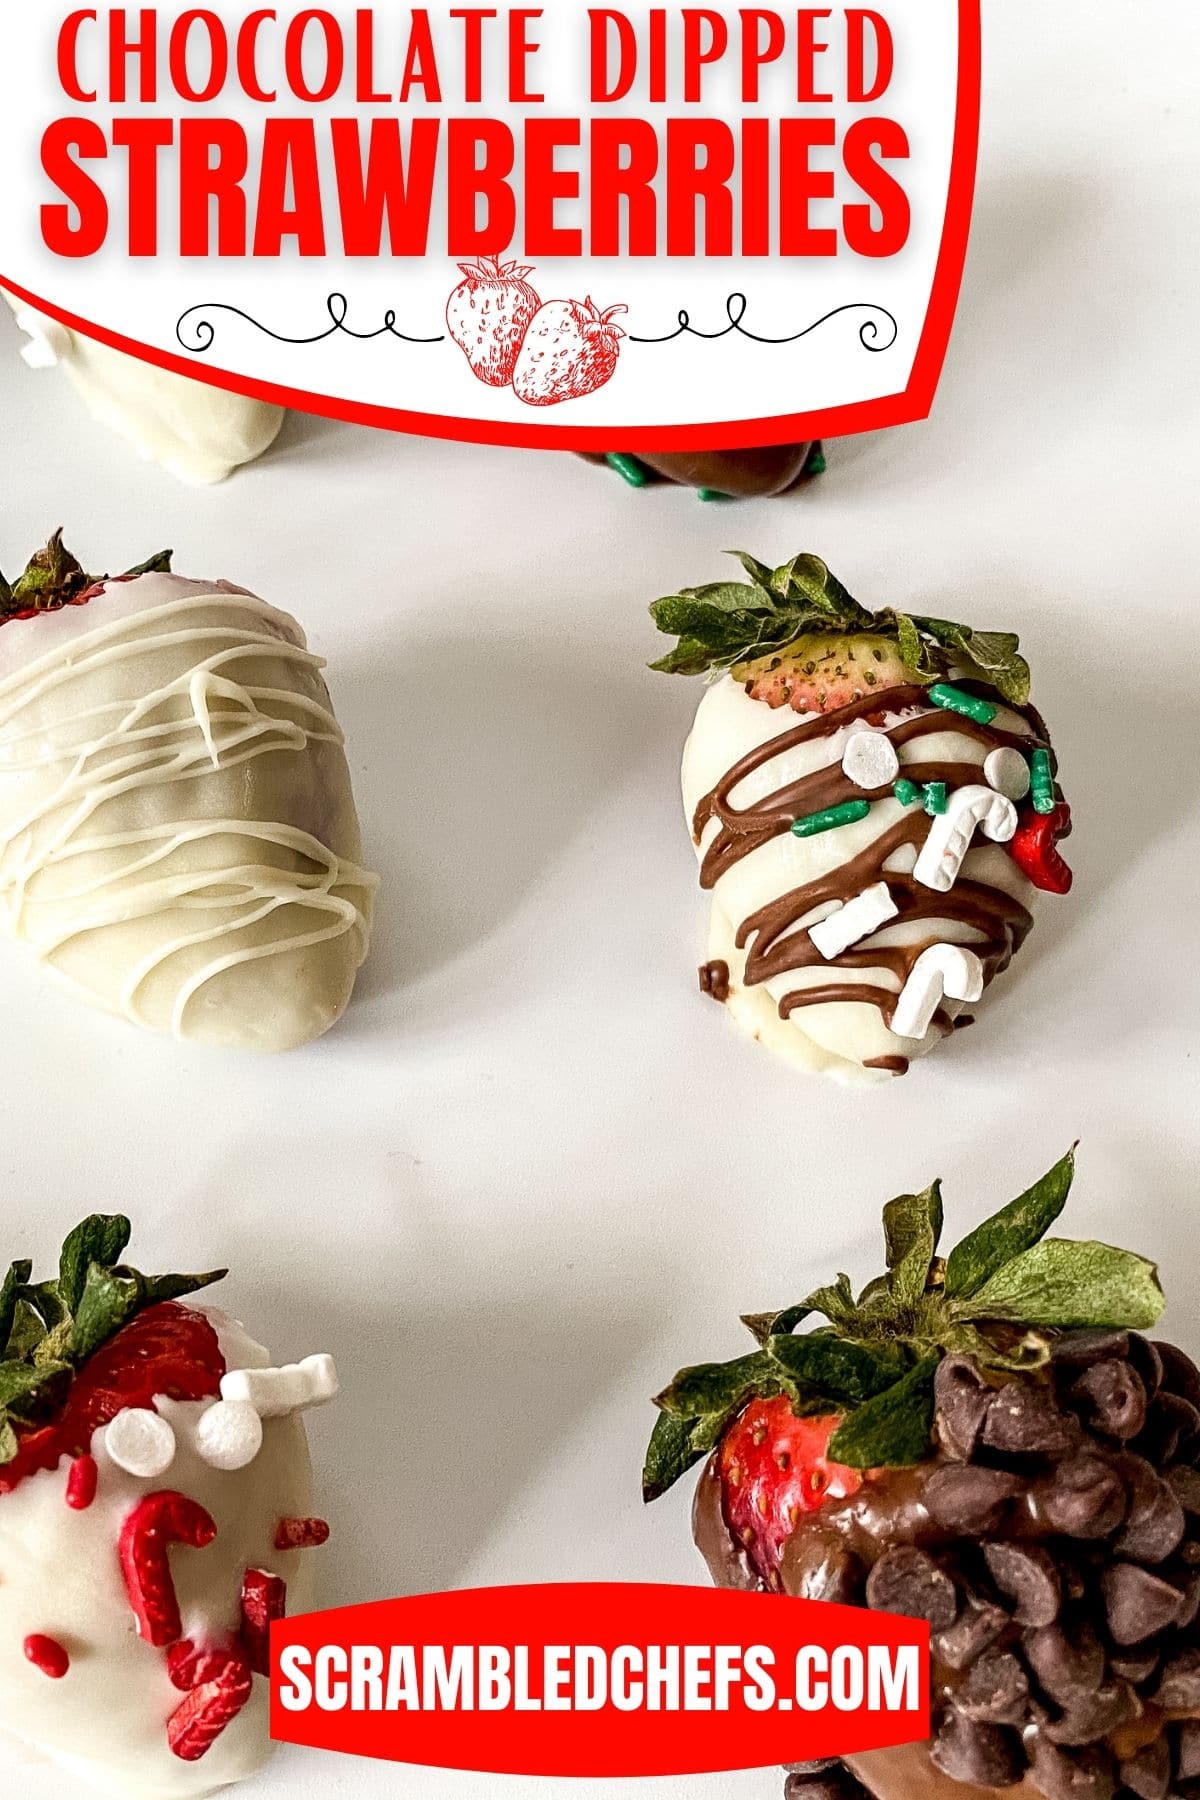 Dipped strawberries on plate